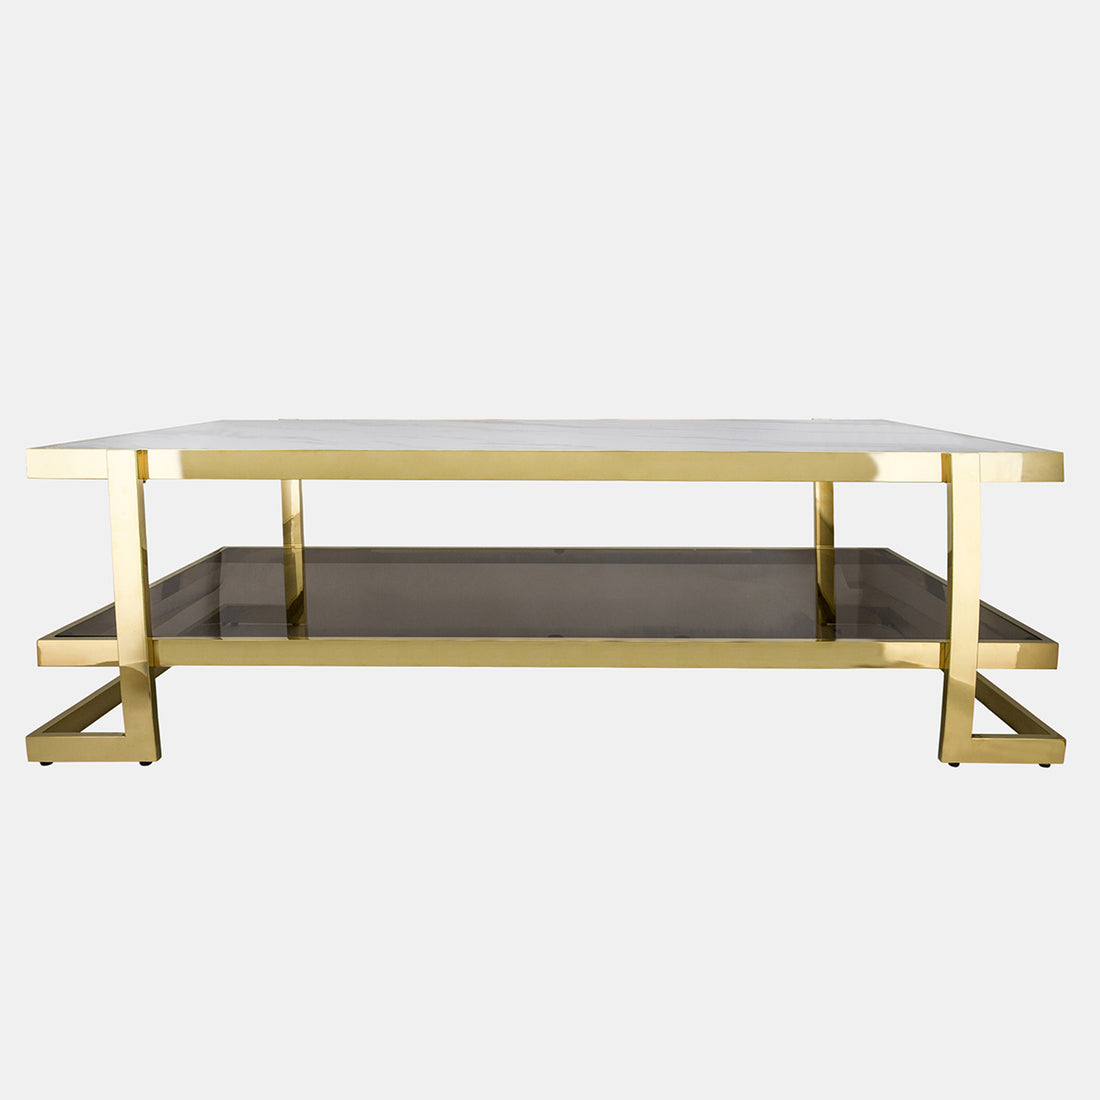 Sagebrook Home Metal/marble Glass Coffee Table, Gold/white Kd